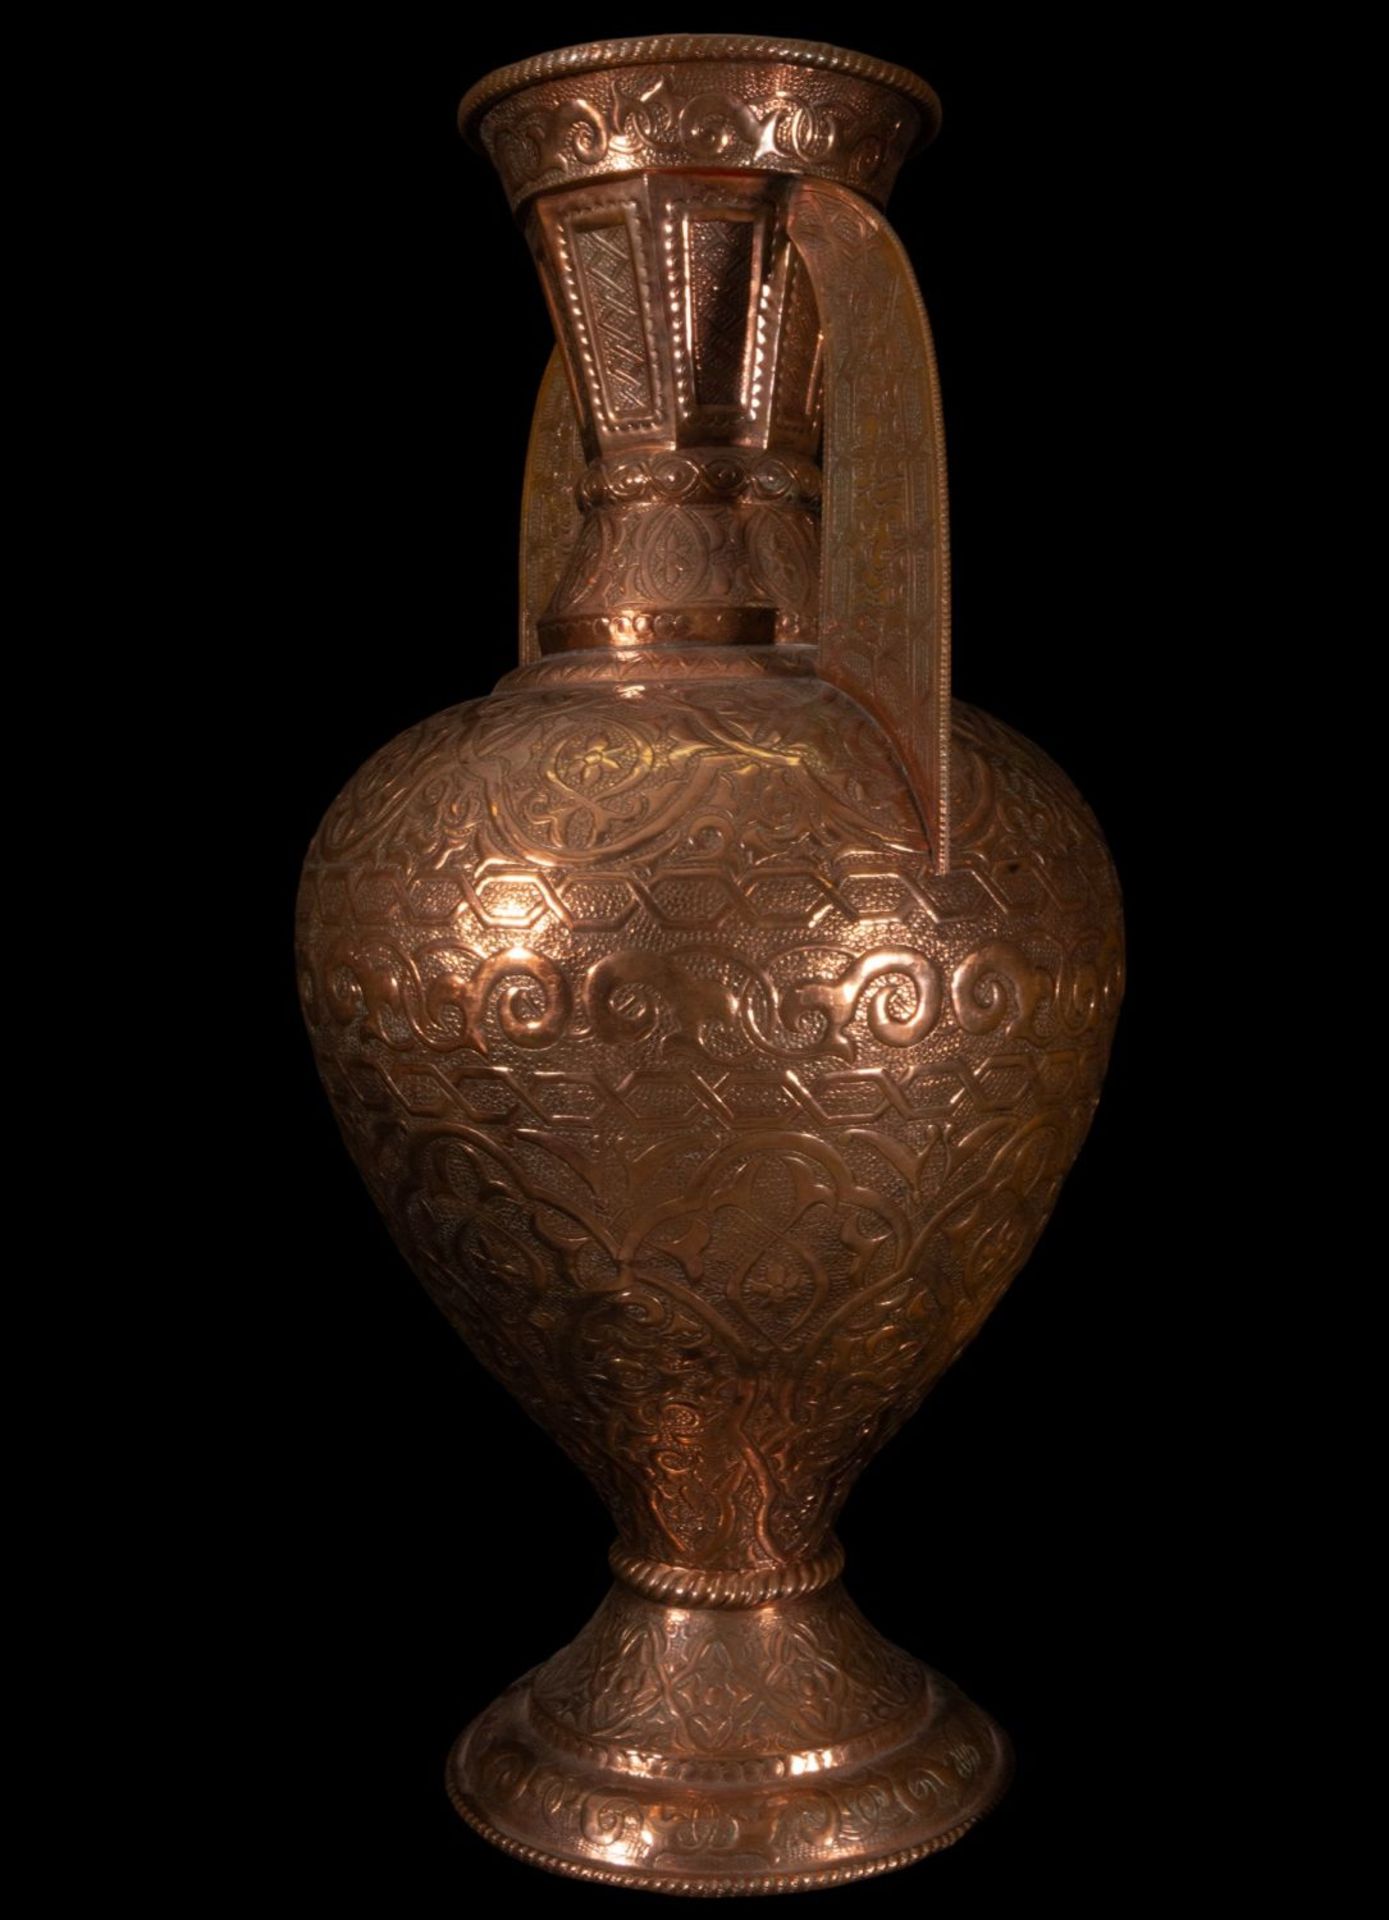 Pair of Large Embossed Copper Vases in the "Alhambra" style, Andalusian Granada work from the 19th c - Image 7 of 10